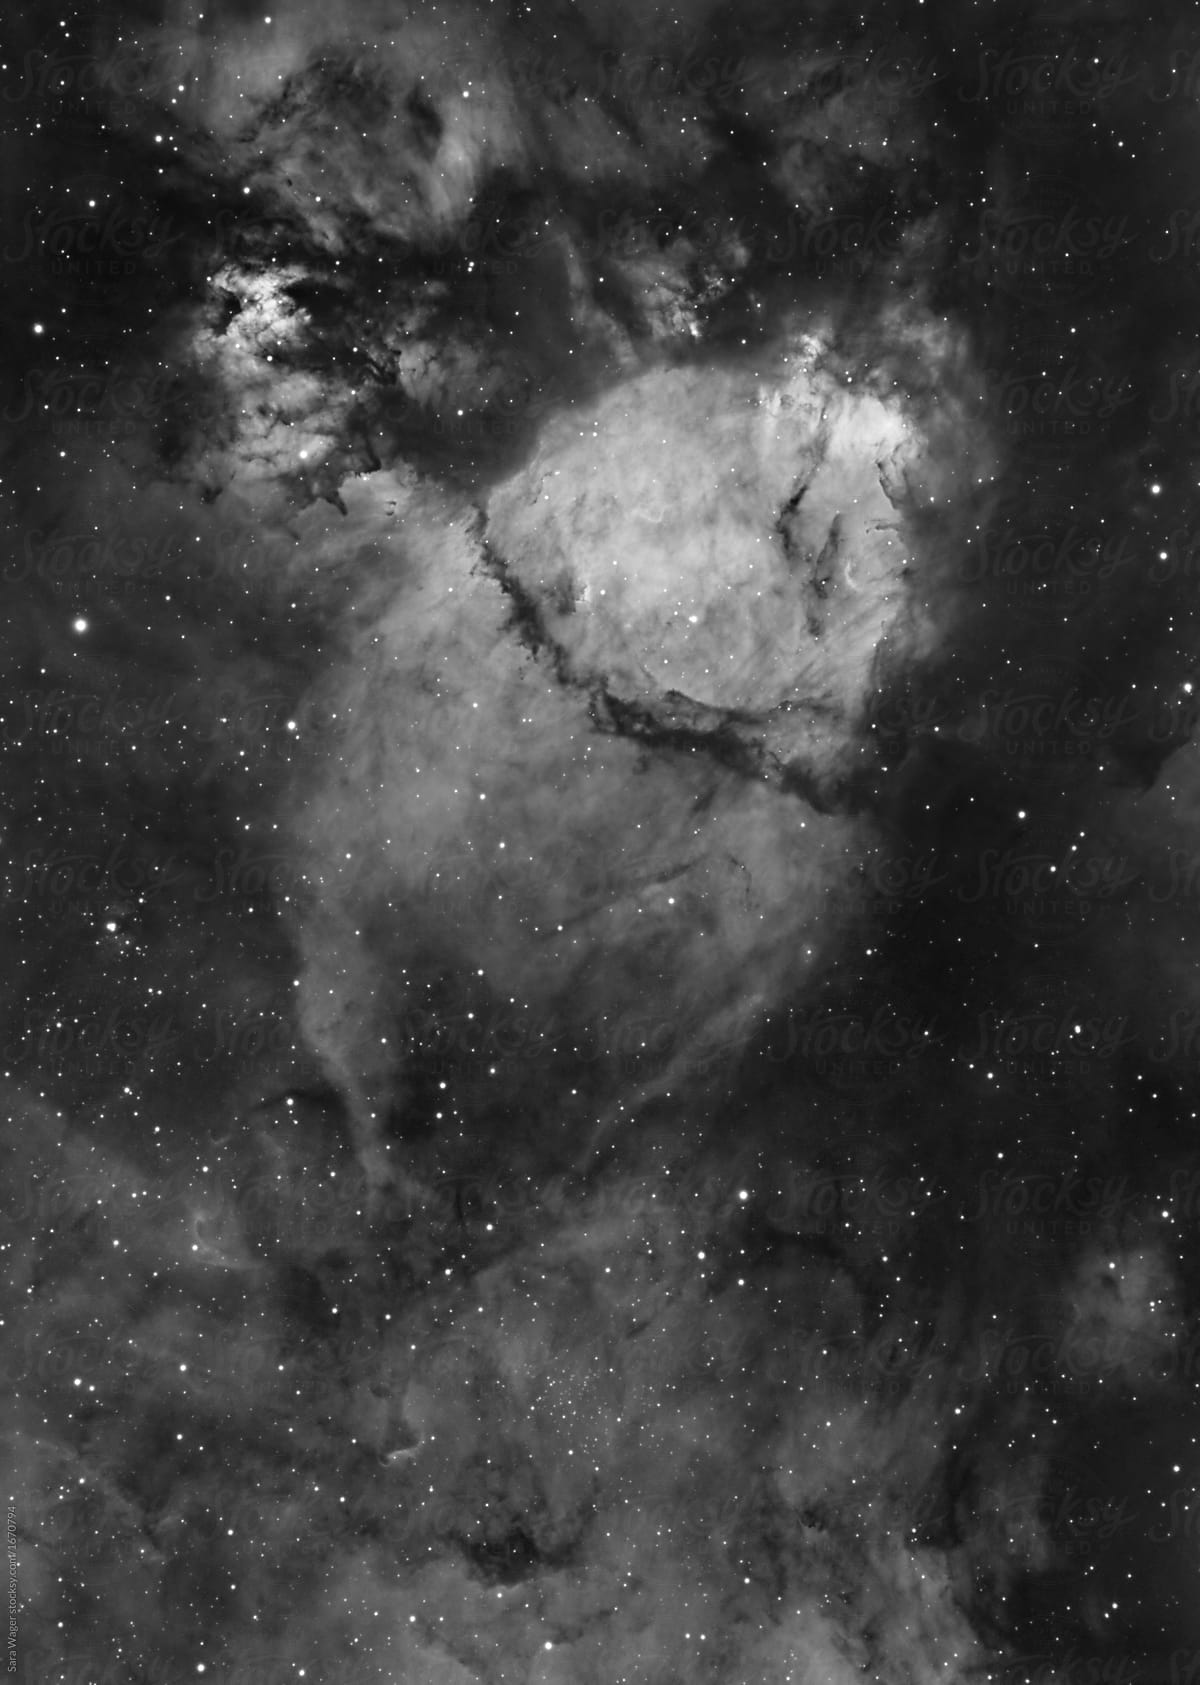 The end of the Heart nebula in mono